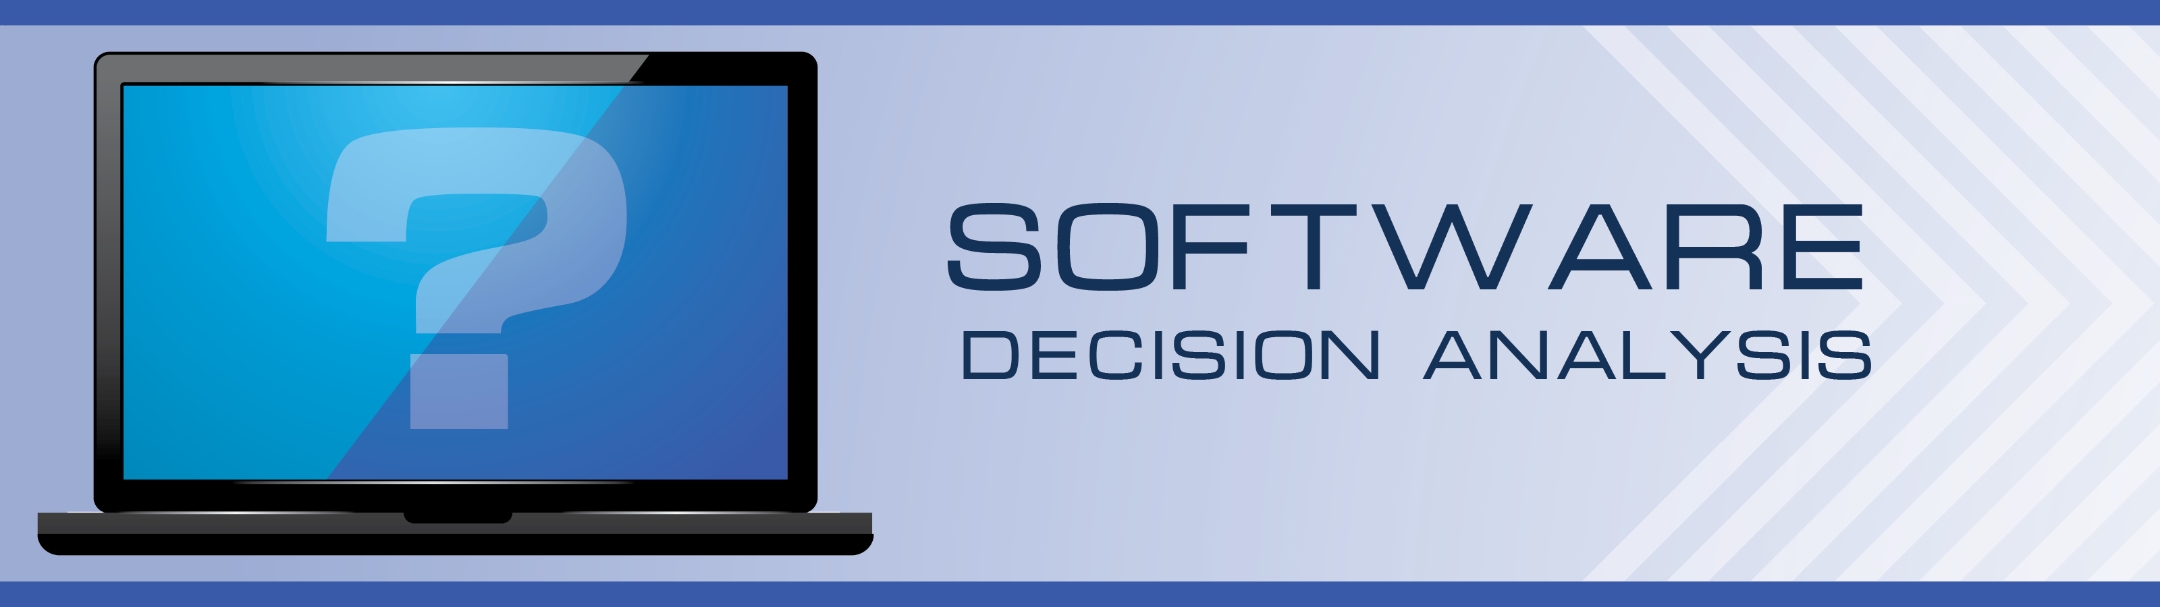 Software Decision Analysis Banner